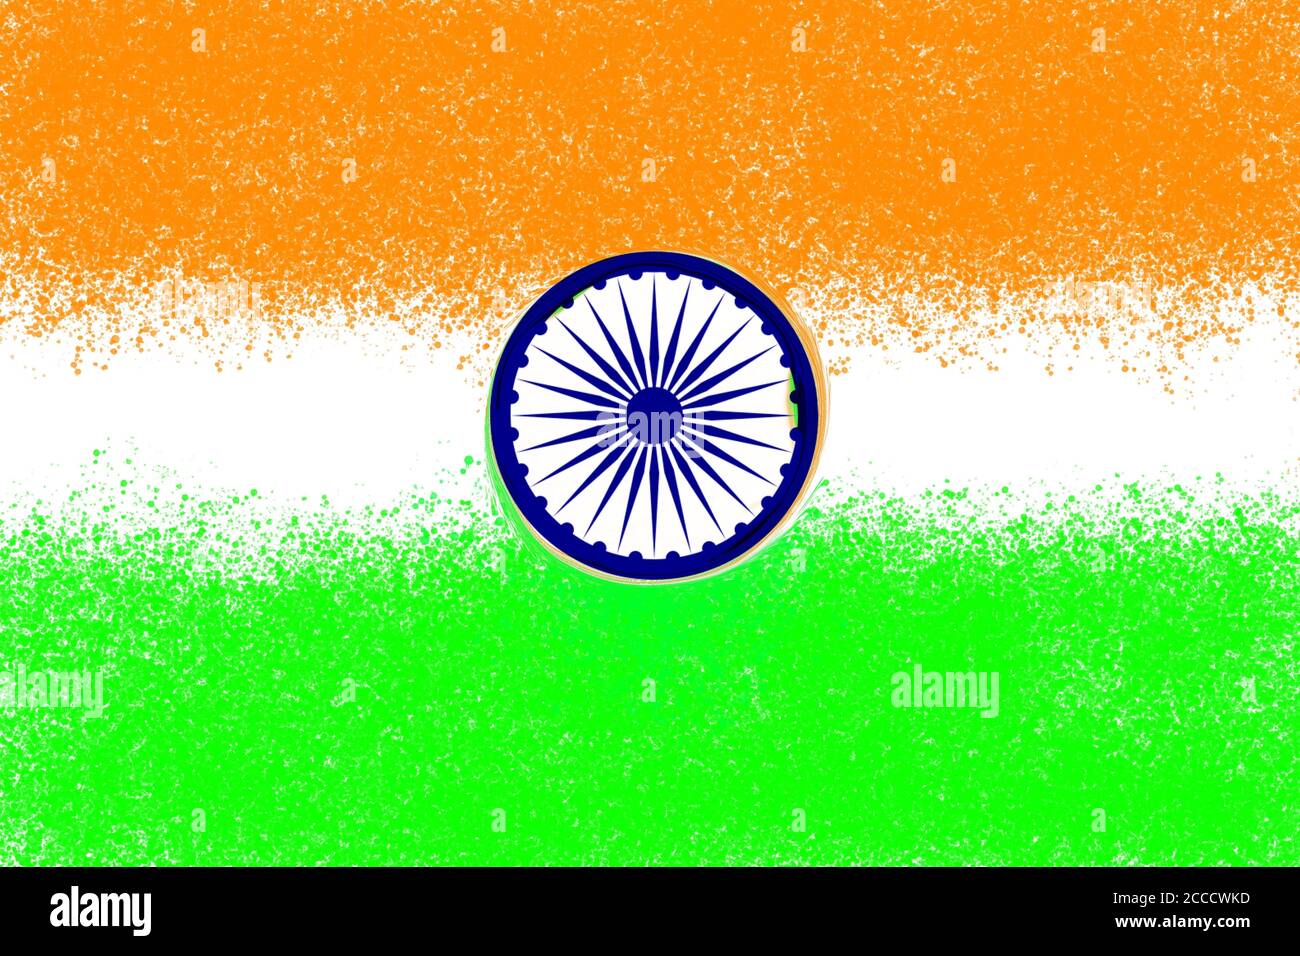 Illustration of the Indian flag for backgrounds and wallpapers Stock Photo  - Alamy